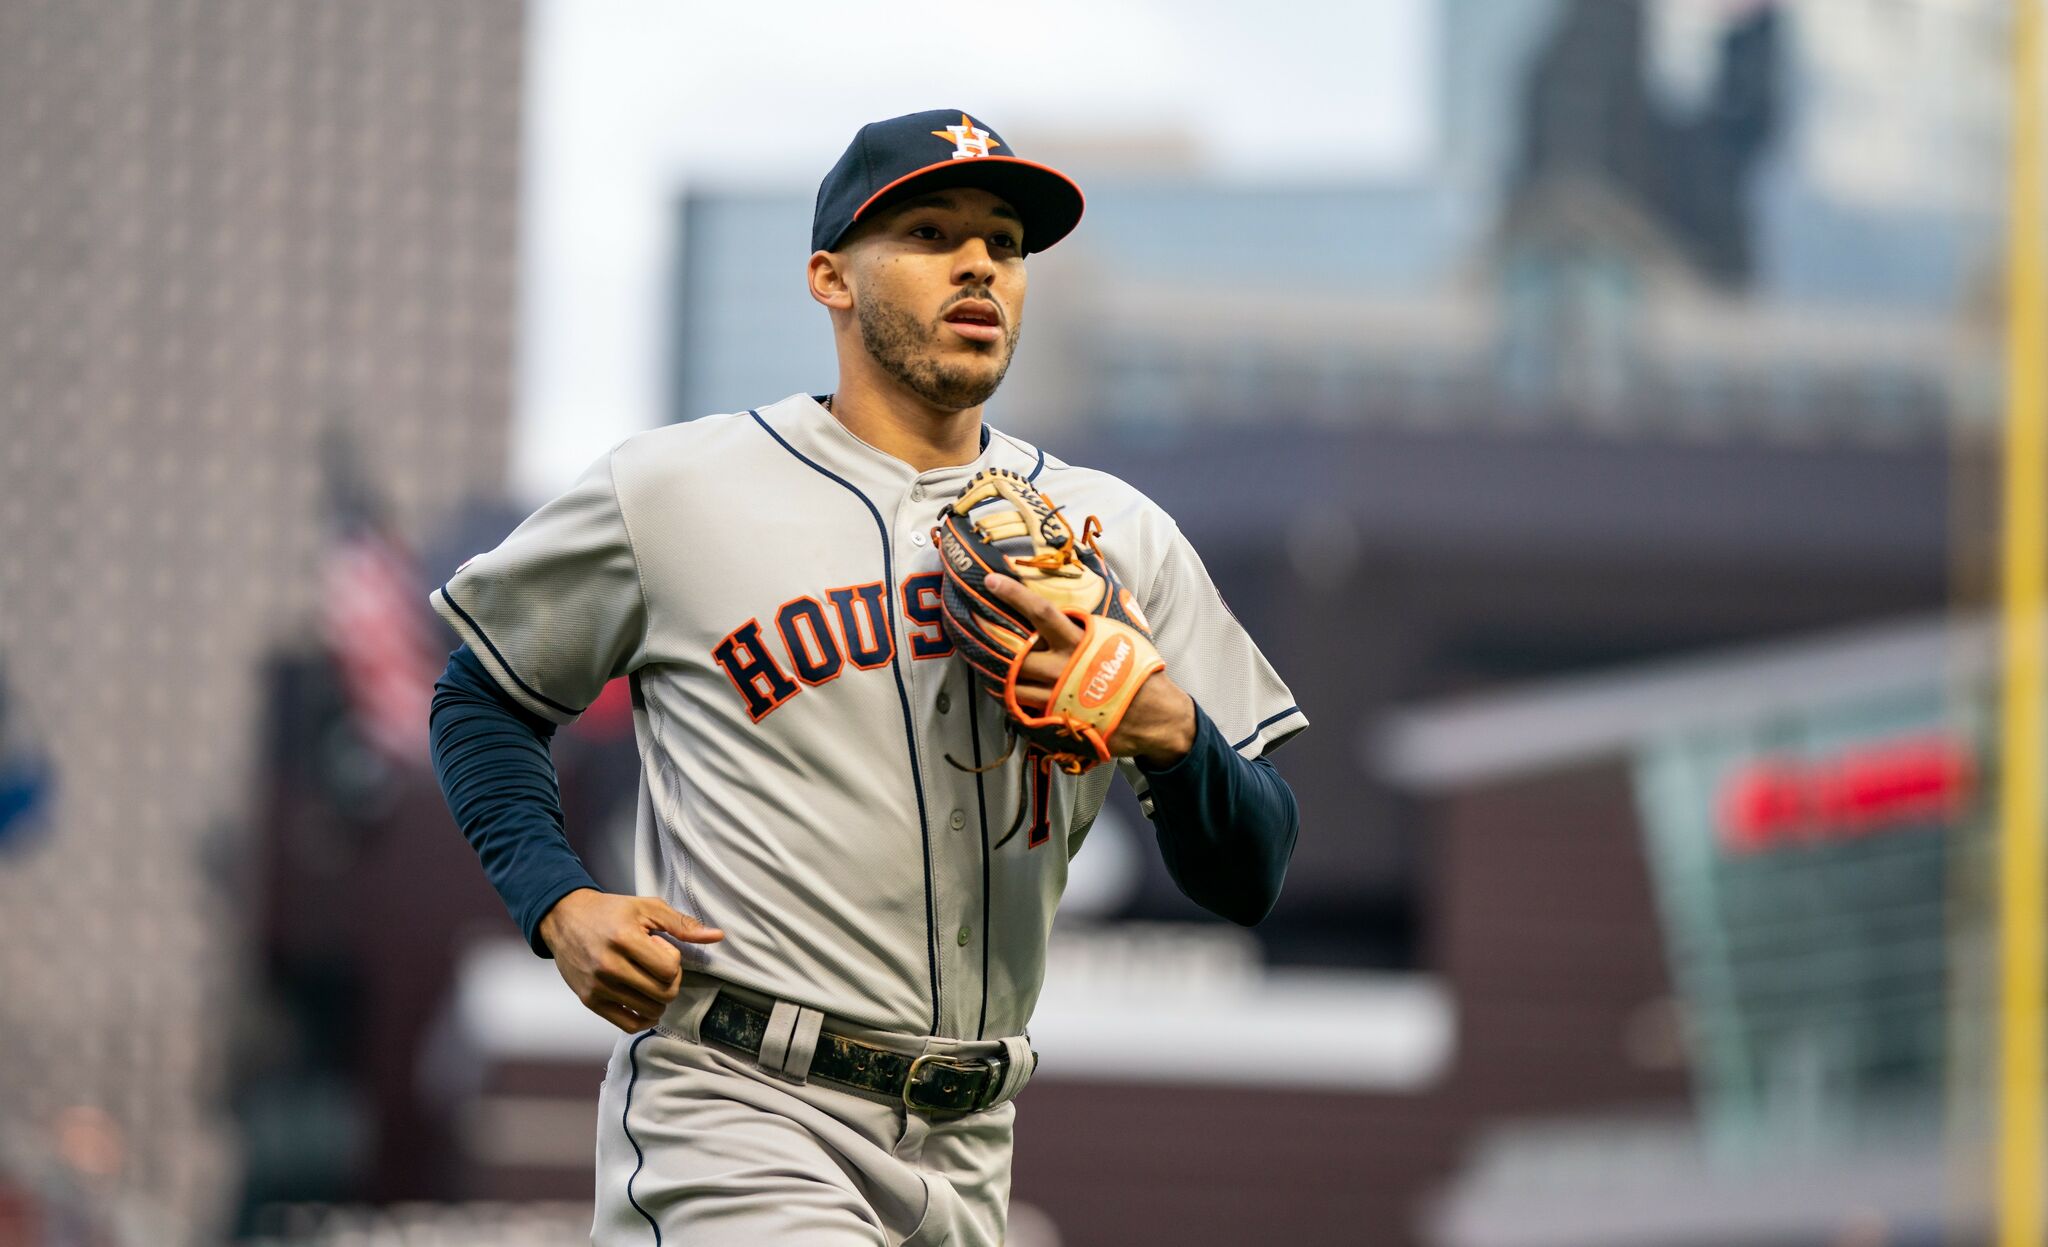 Astros statement on Carlos Correa signing with Minnesota Twins